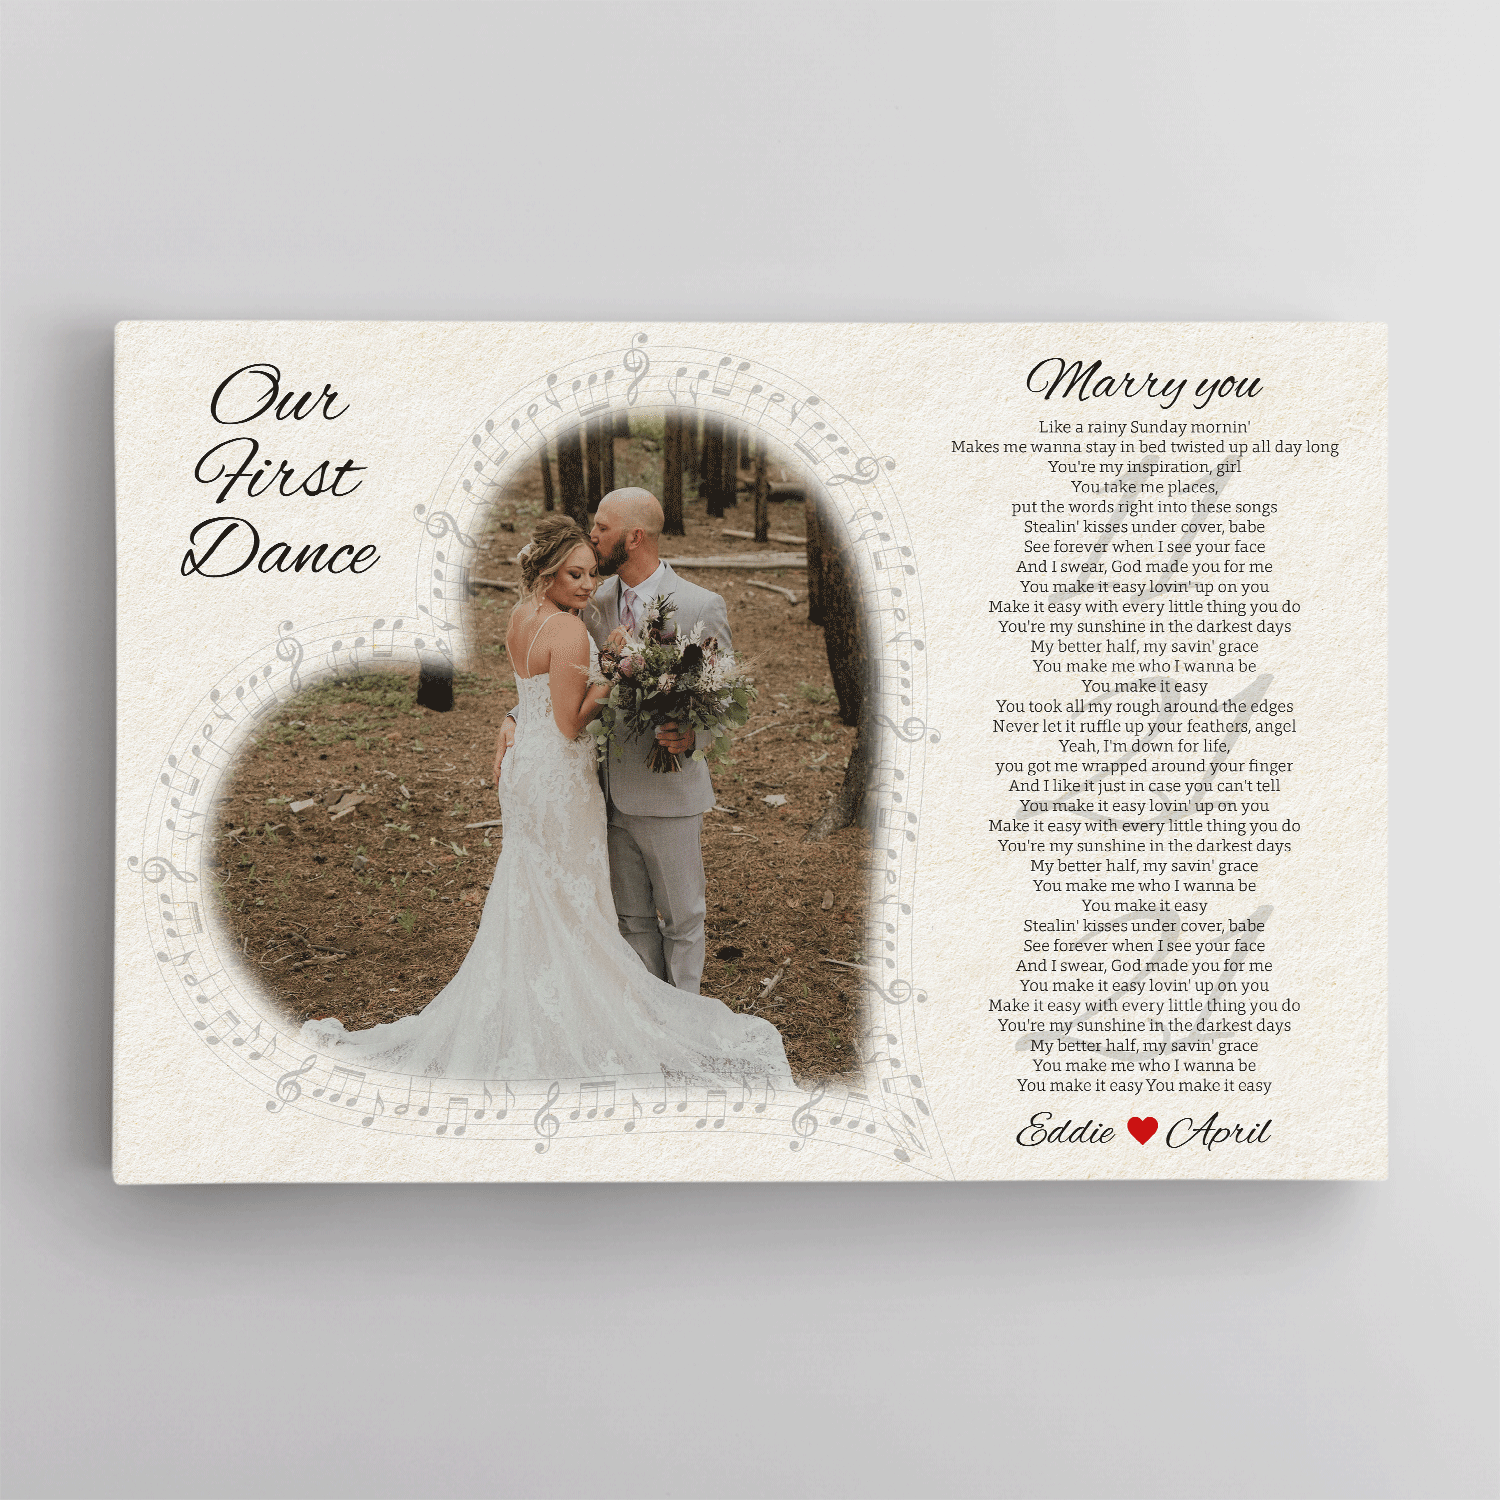 Our Story Began, Personalized Song Lyrics, Heart Shape Photo Canvas